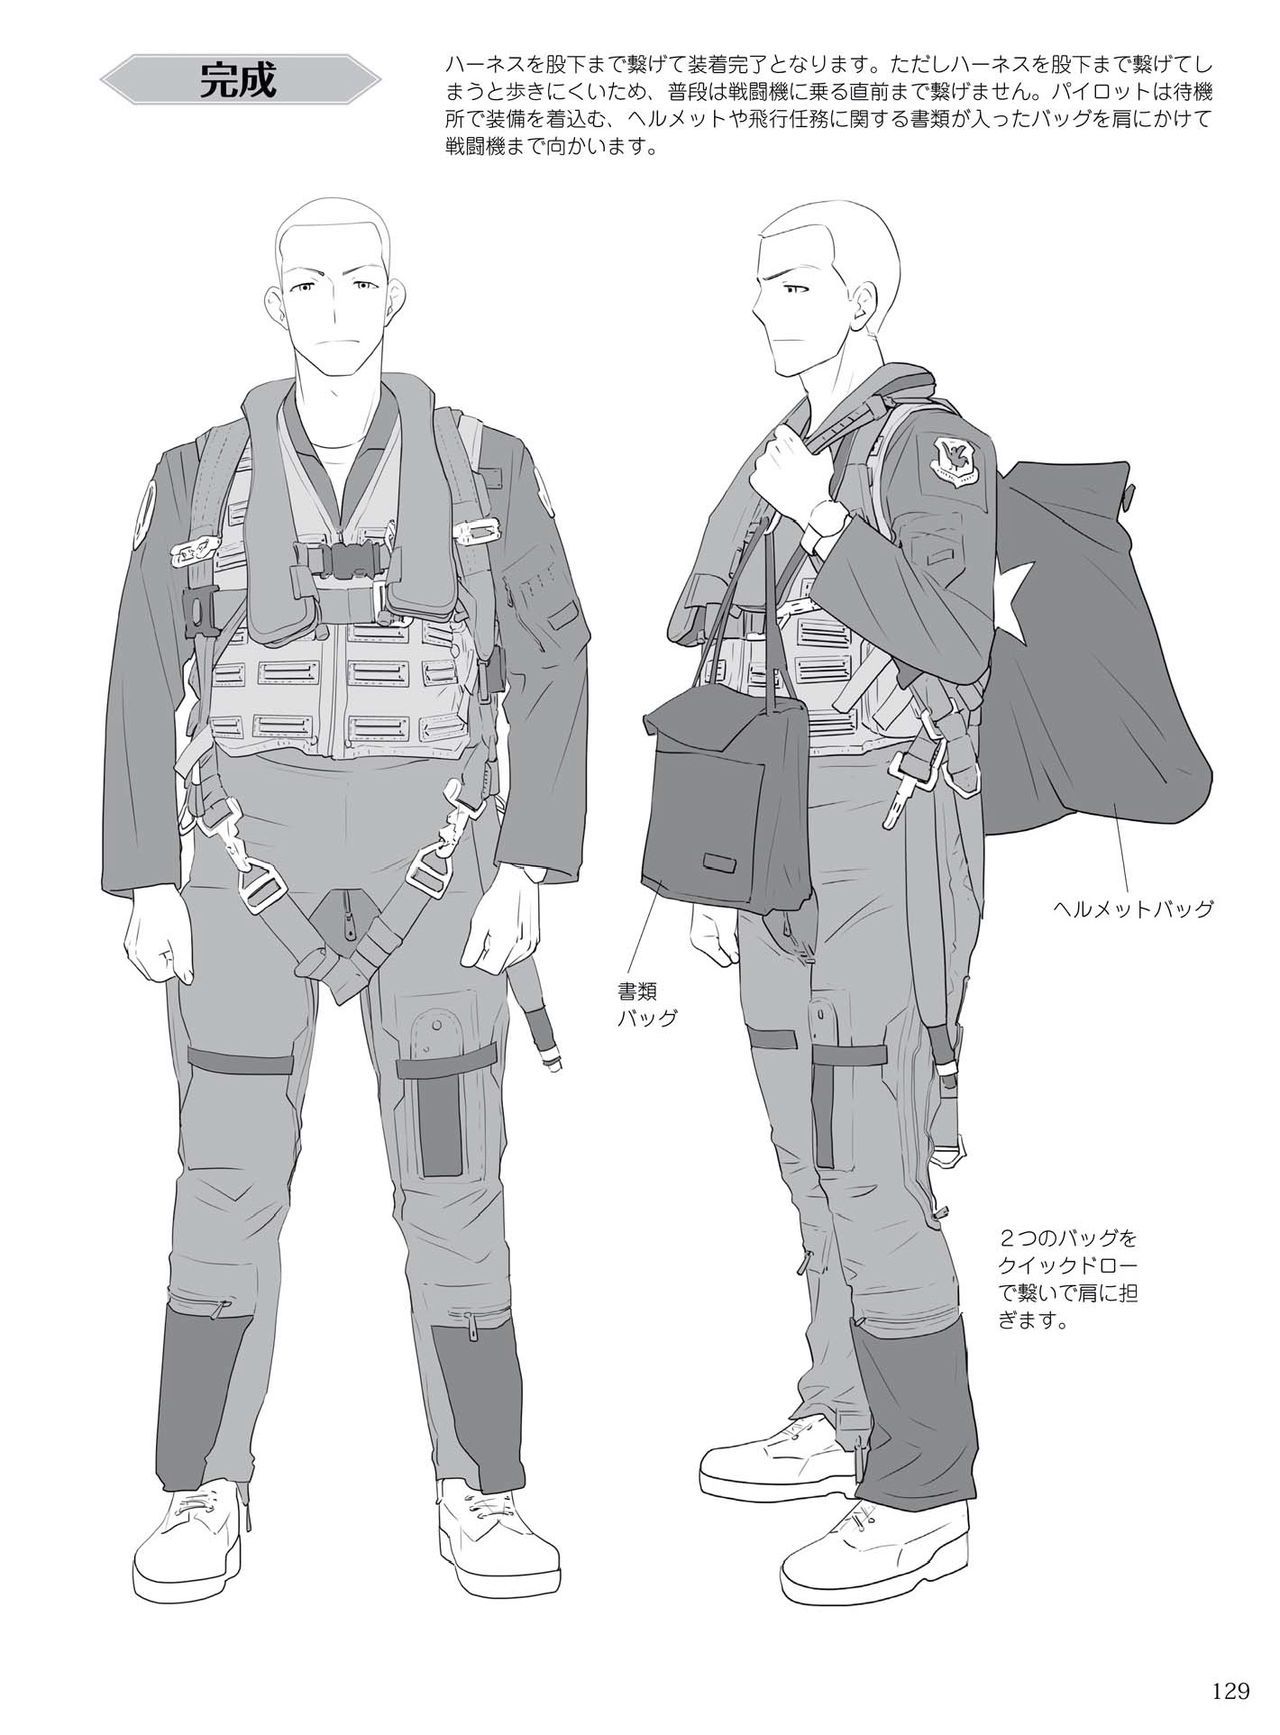 How to draw military uniforms and uniforms From Self-Defense Forces 軍服・制服の描き方 アメリカ軍・自衛隊の制服から戦闘服まで 132